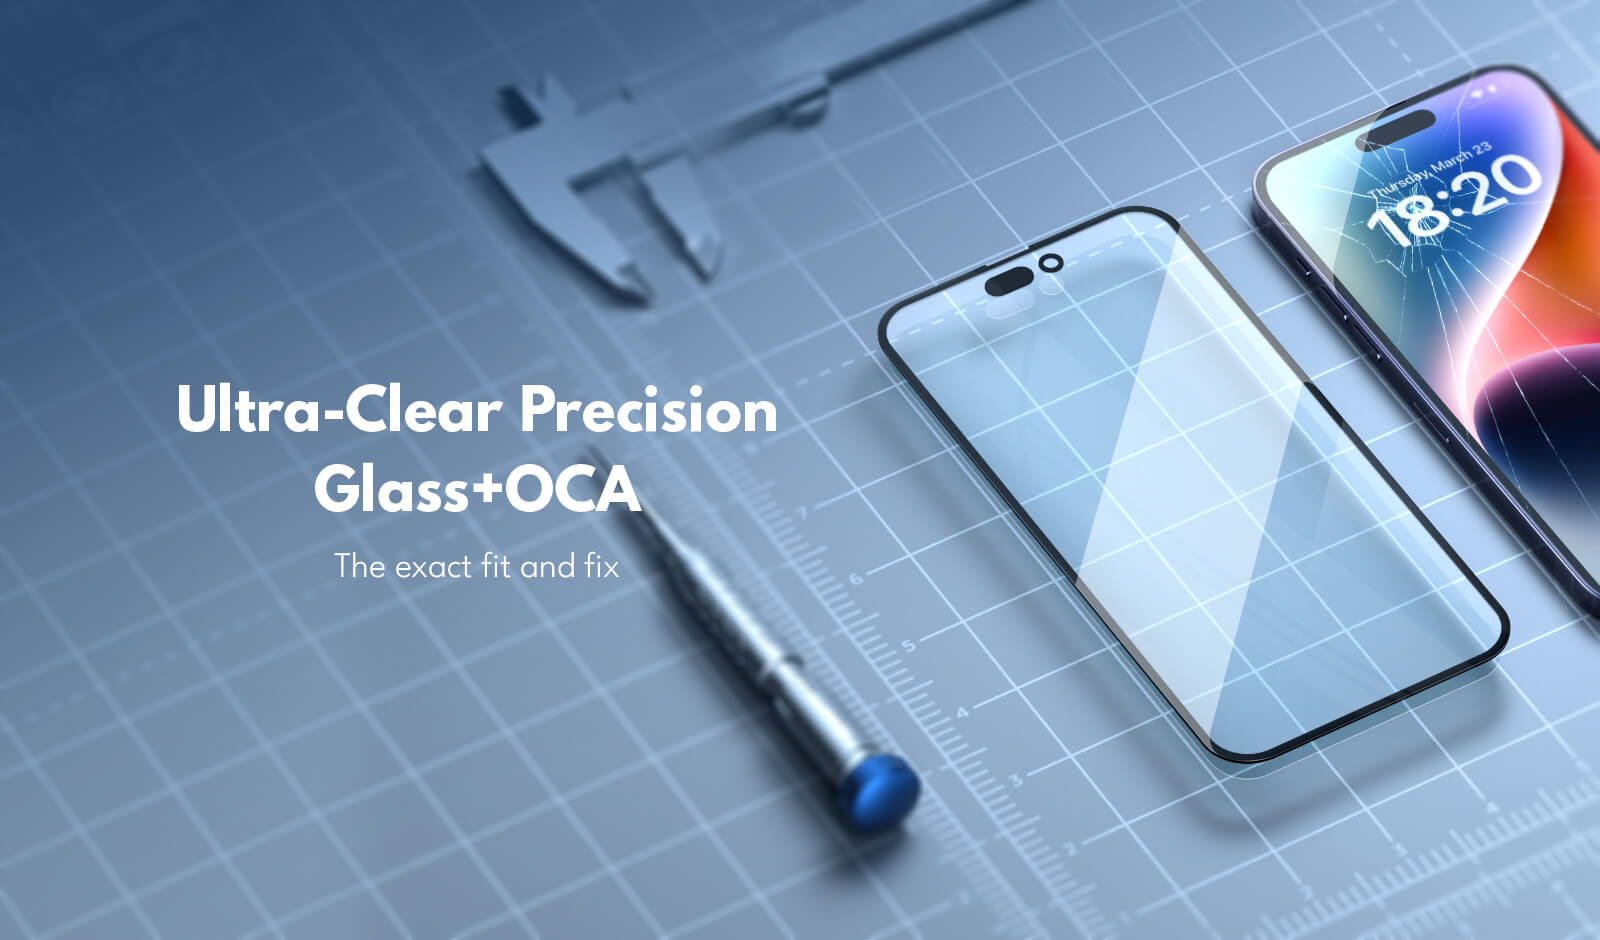 Introducing the new REPART iPhone Front Glass Replacement